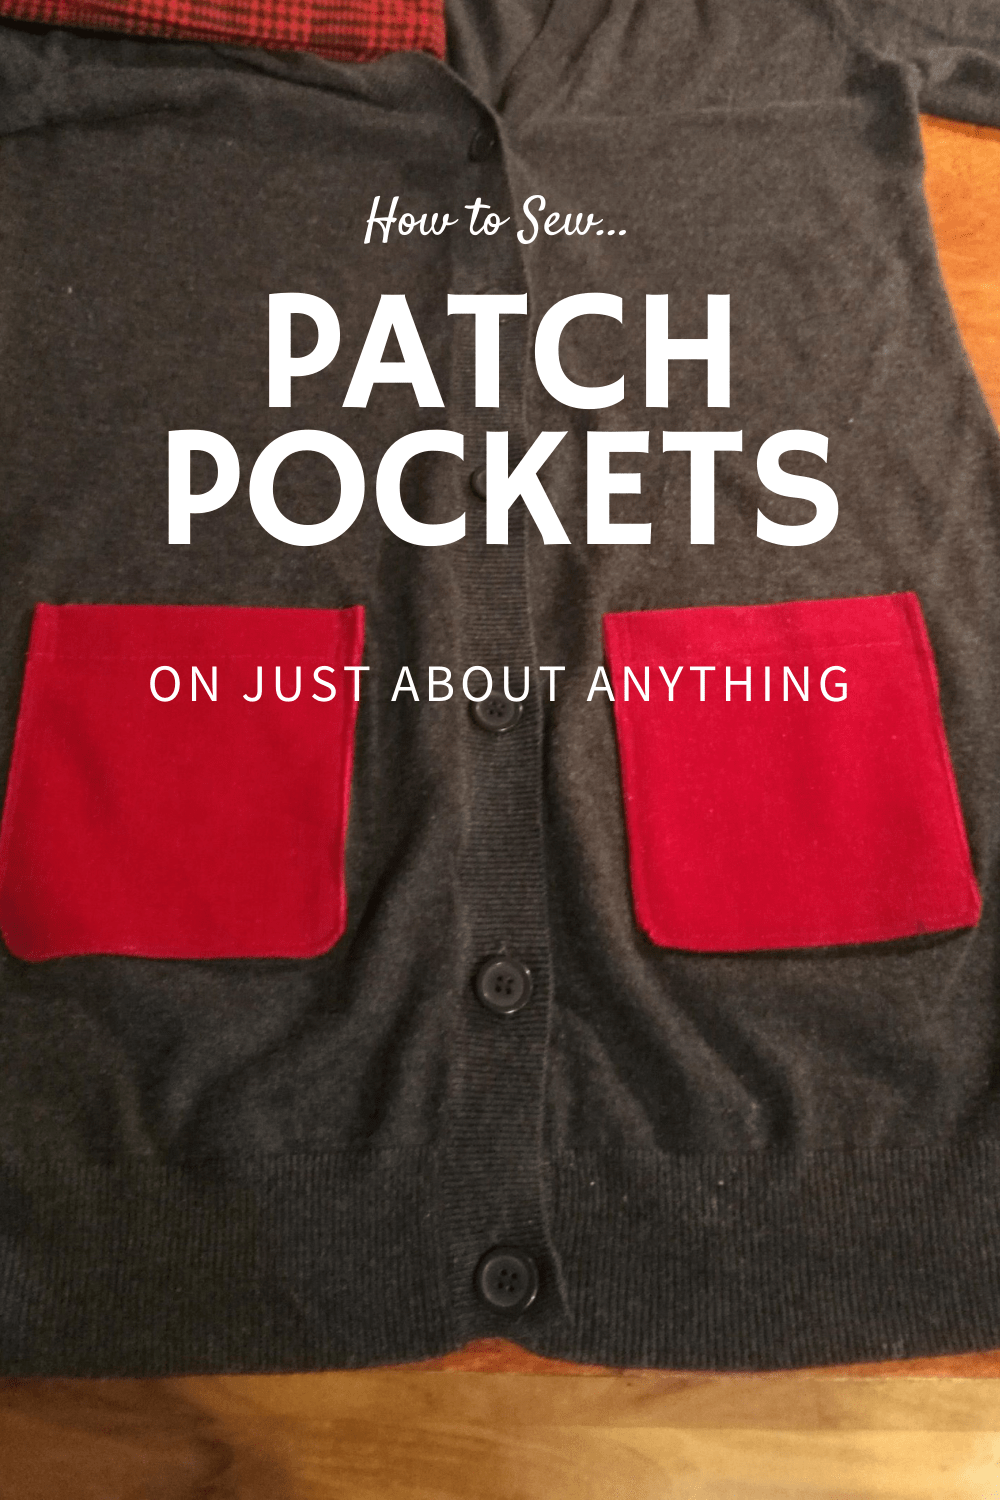 How To Sew On Patches